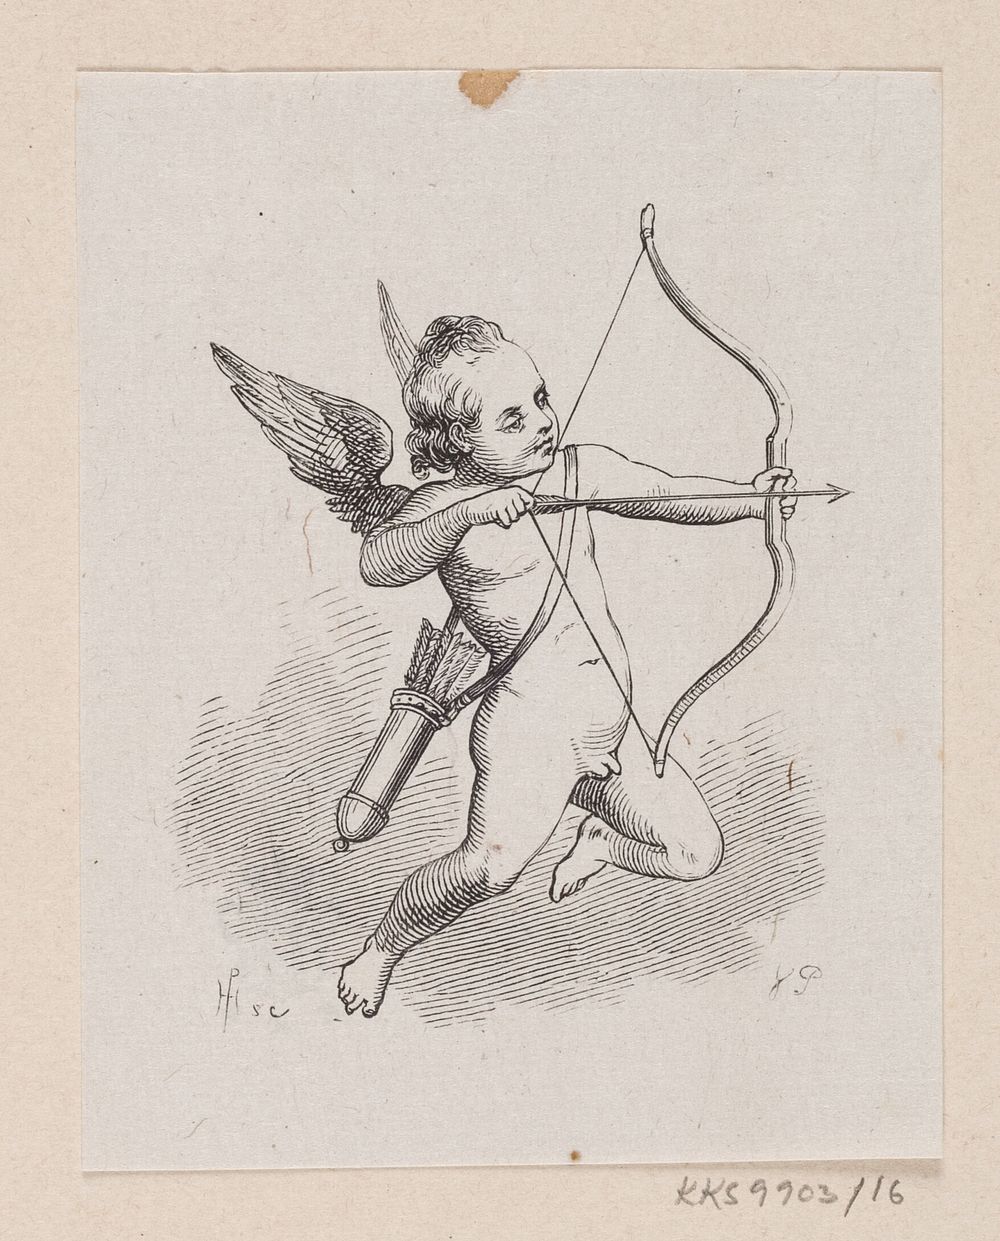 Illustration for "The Naughty Boy" in H.C.Andersen, "Fairy Tales and Stories", Volume 1